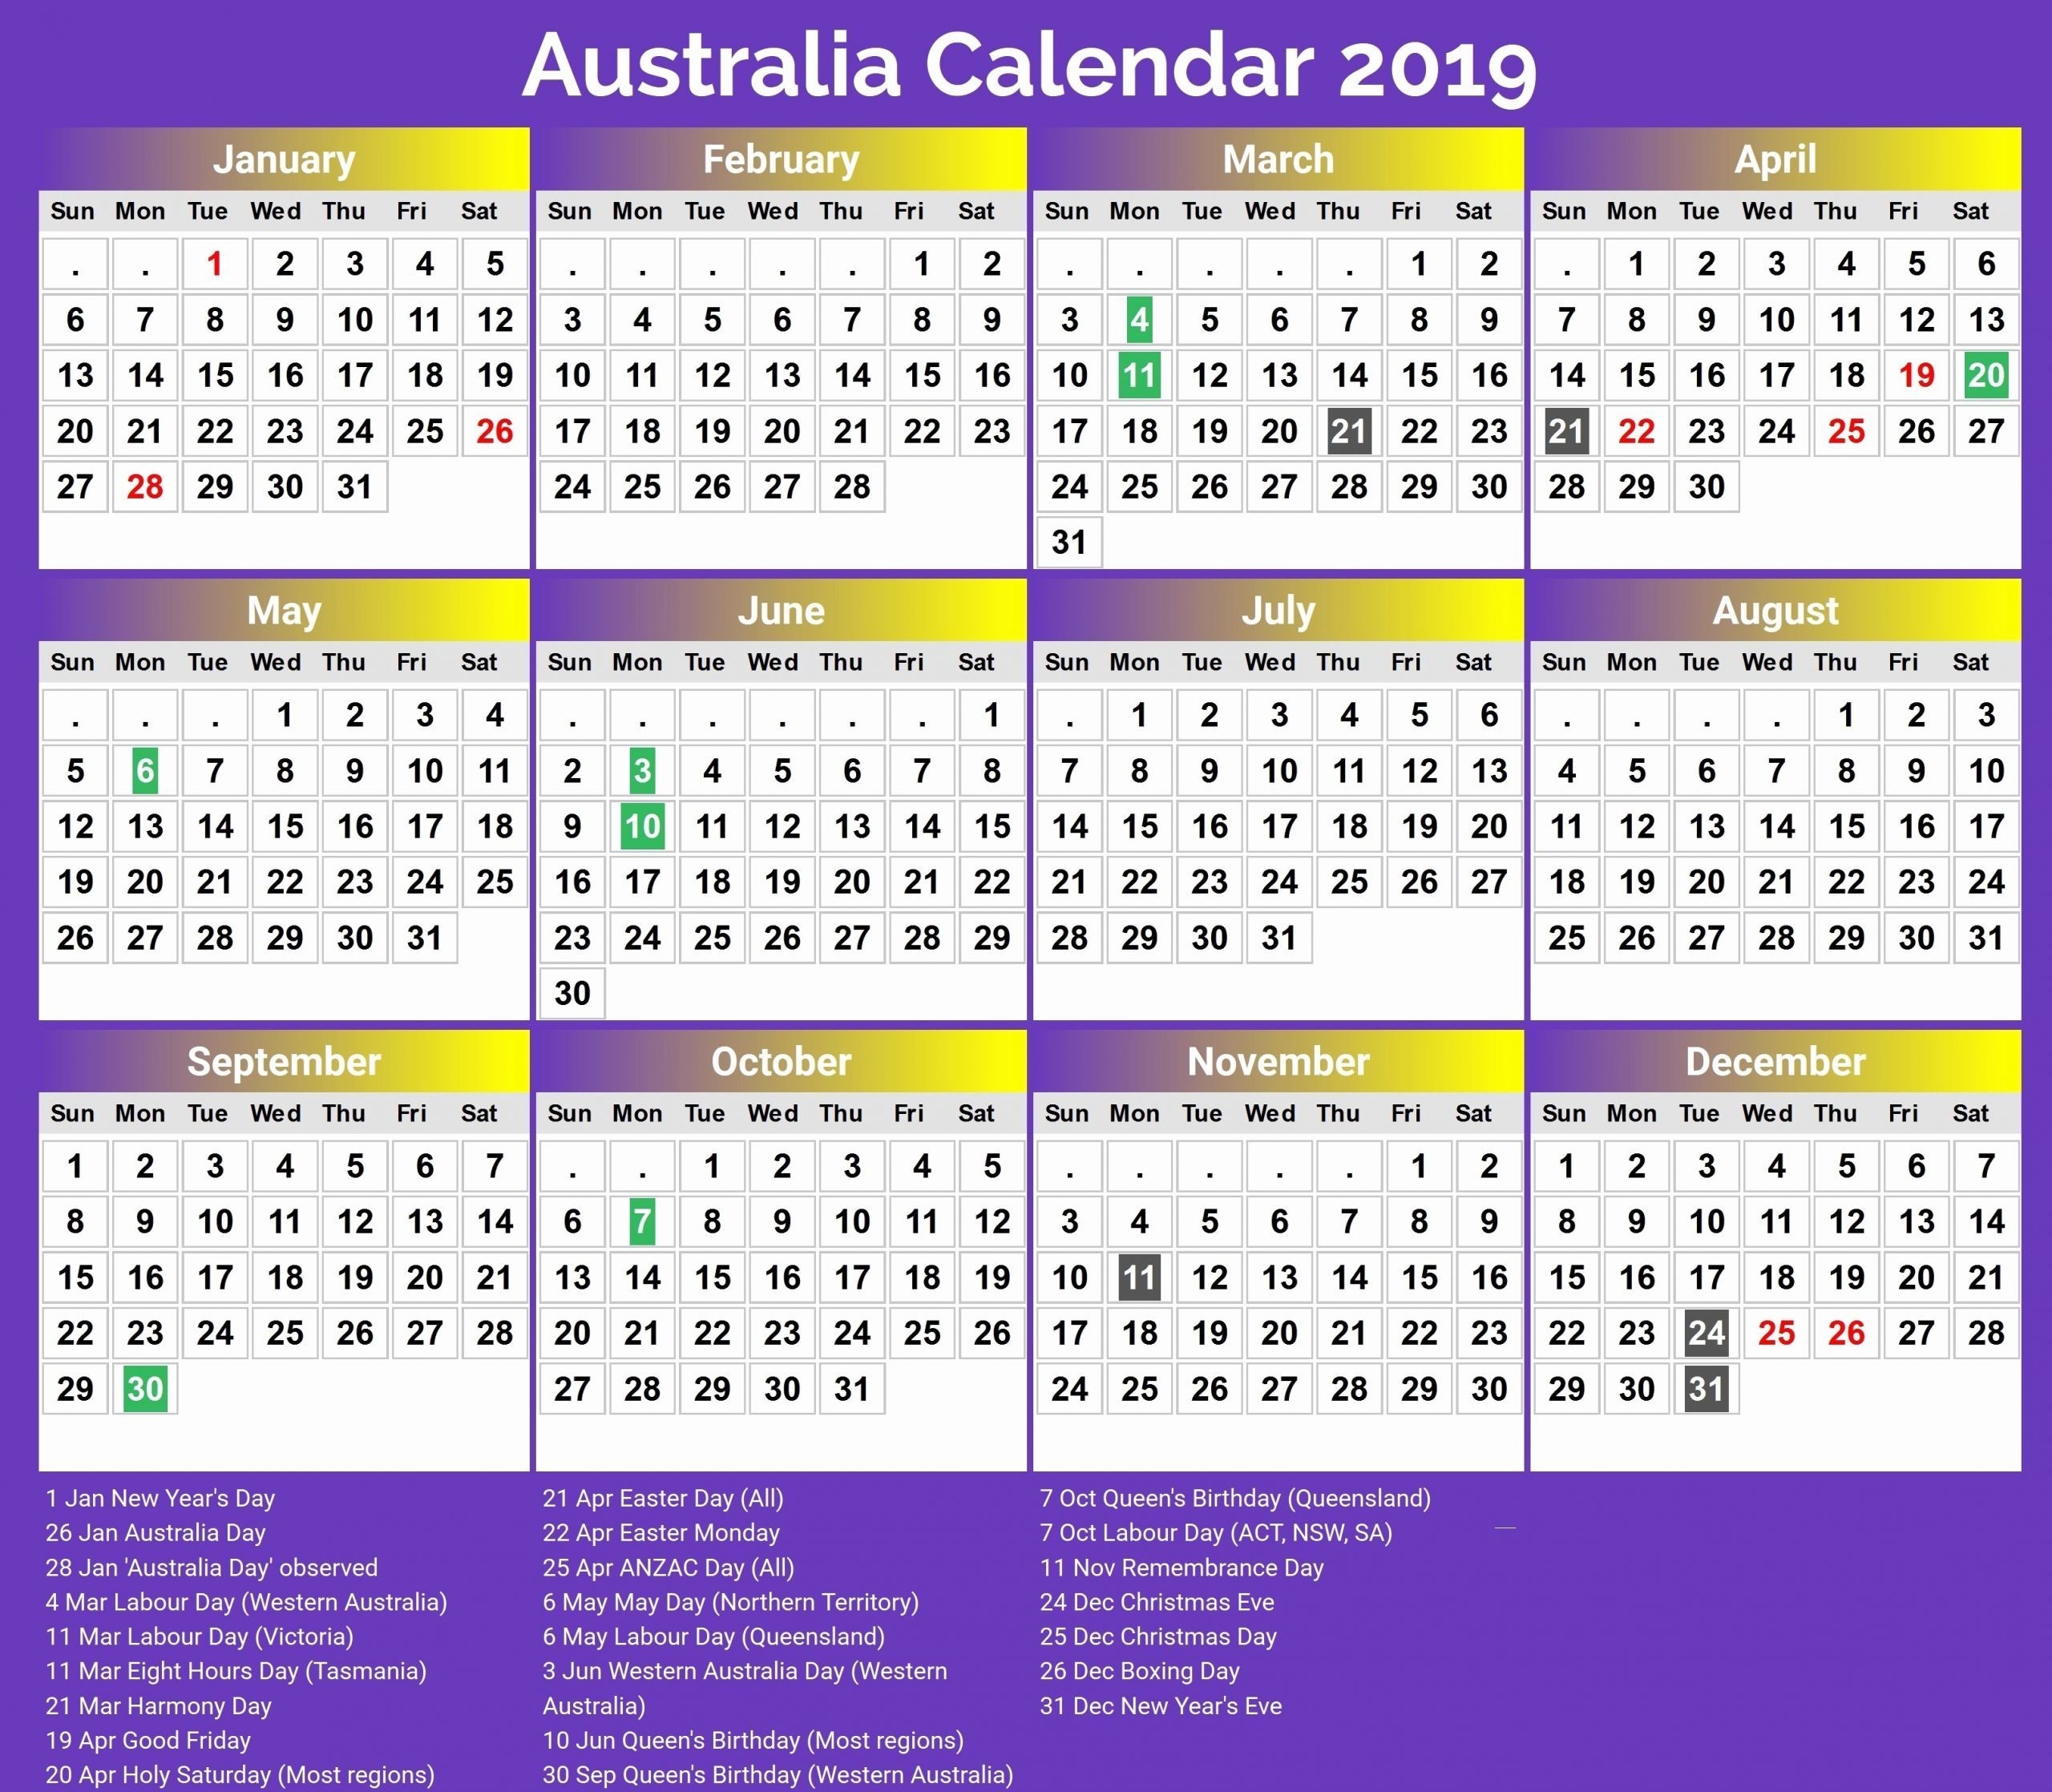 2021 Easter Dates Qld - Th2021